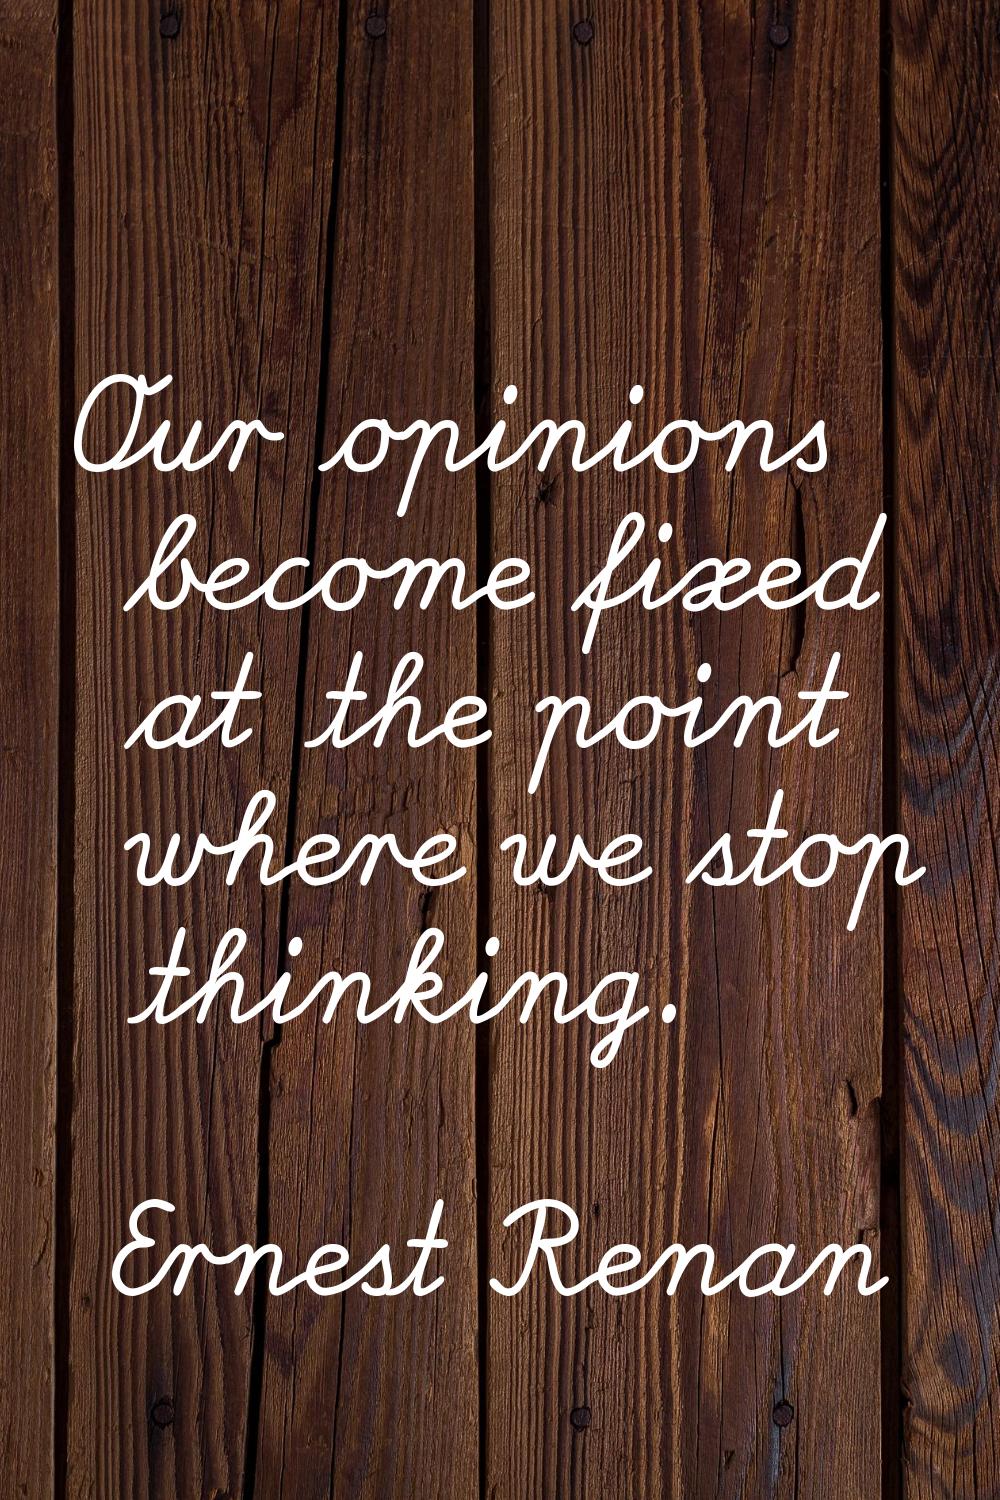 Our opinions become fixed at the point where we stop thinking.